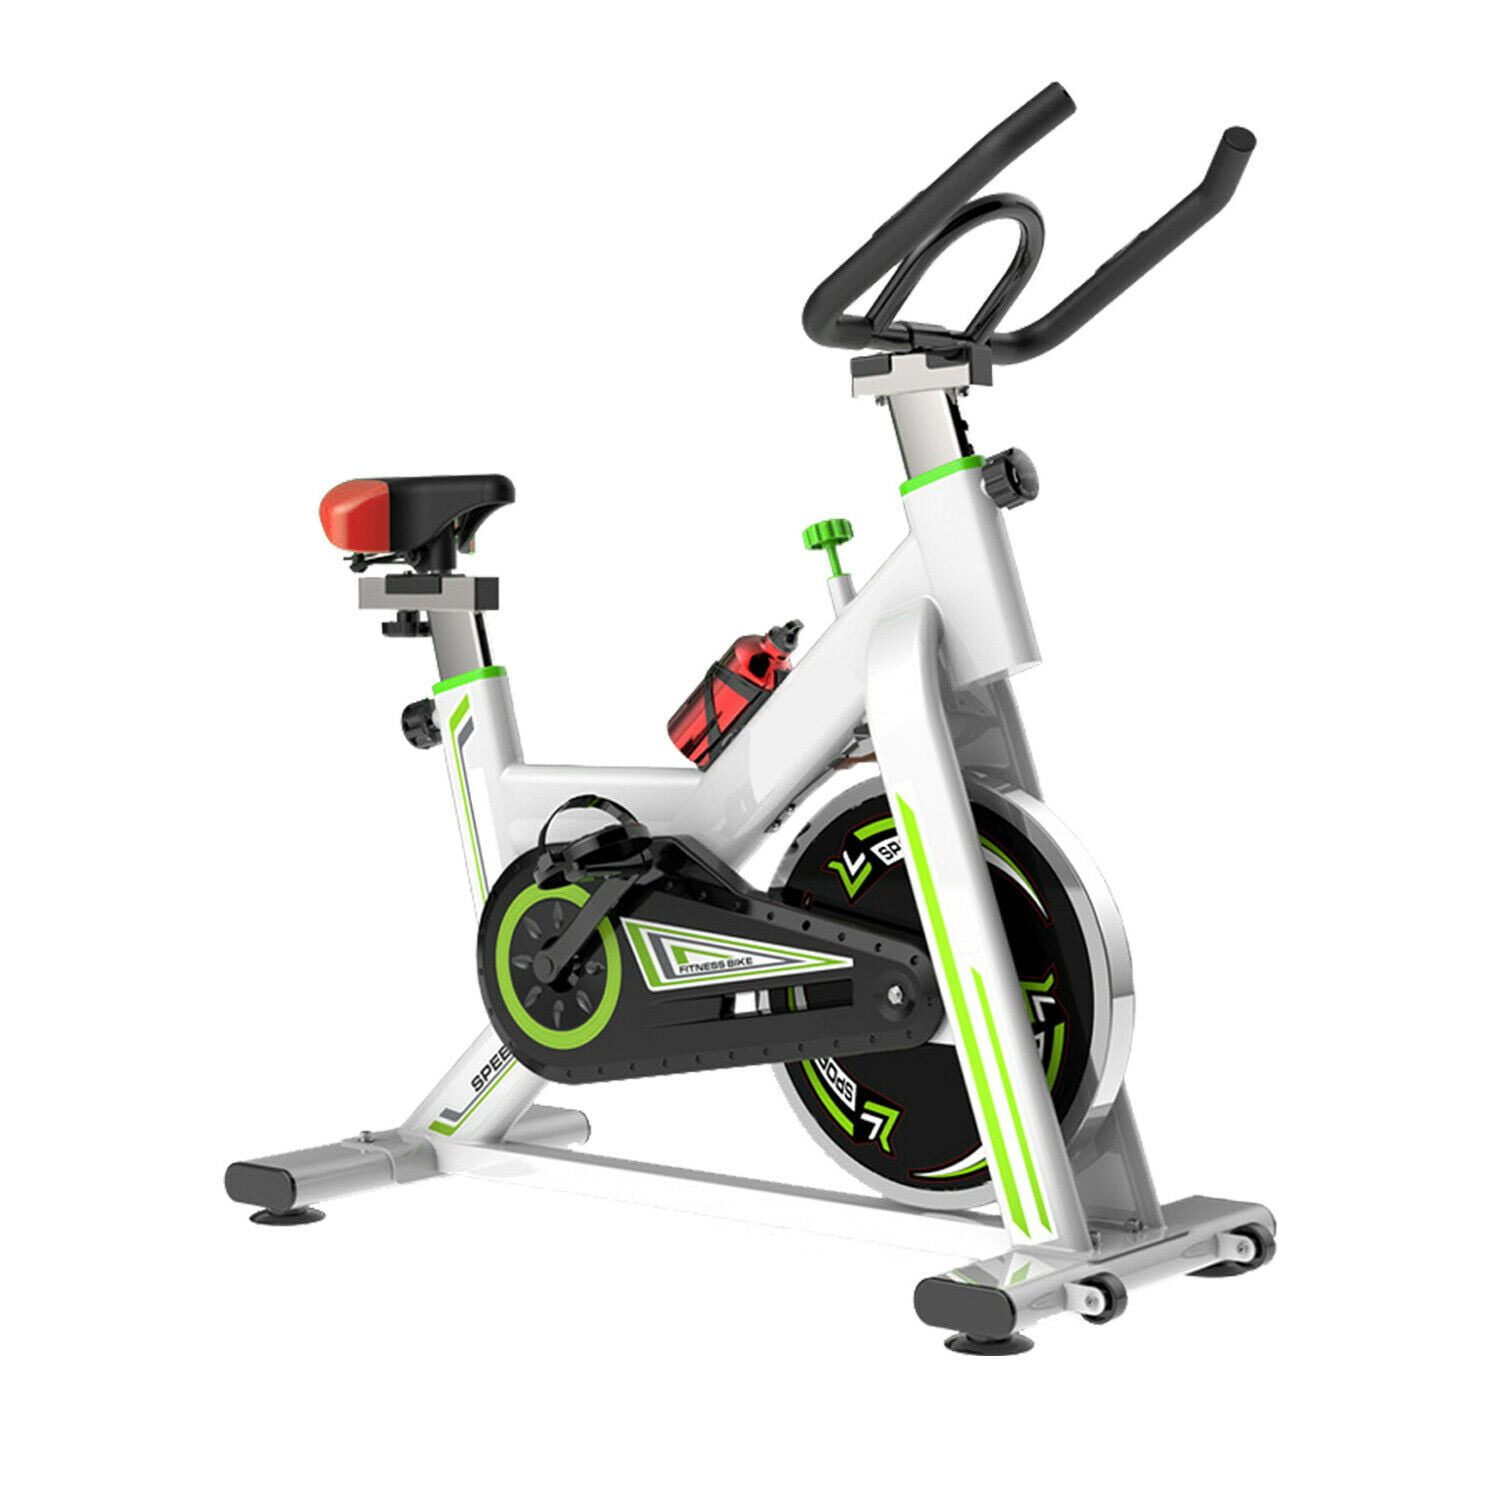 Details about   Exercise Bicycle Cycling Fitness Stationary Bike Cardio Home Indoor 2colors US 